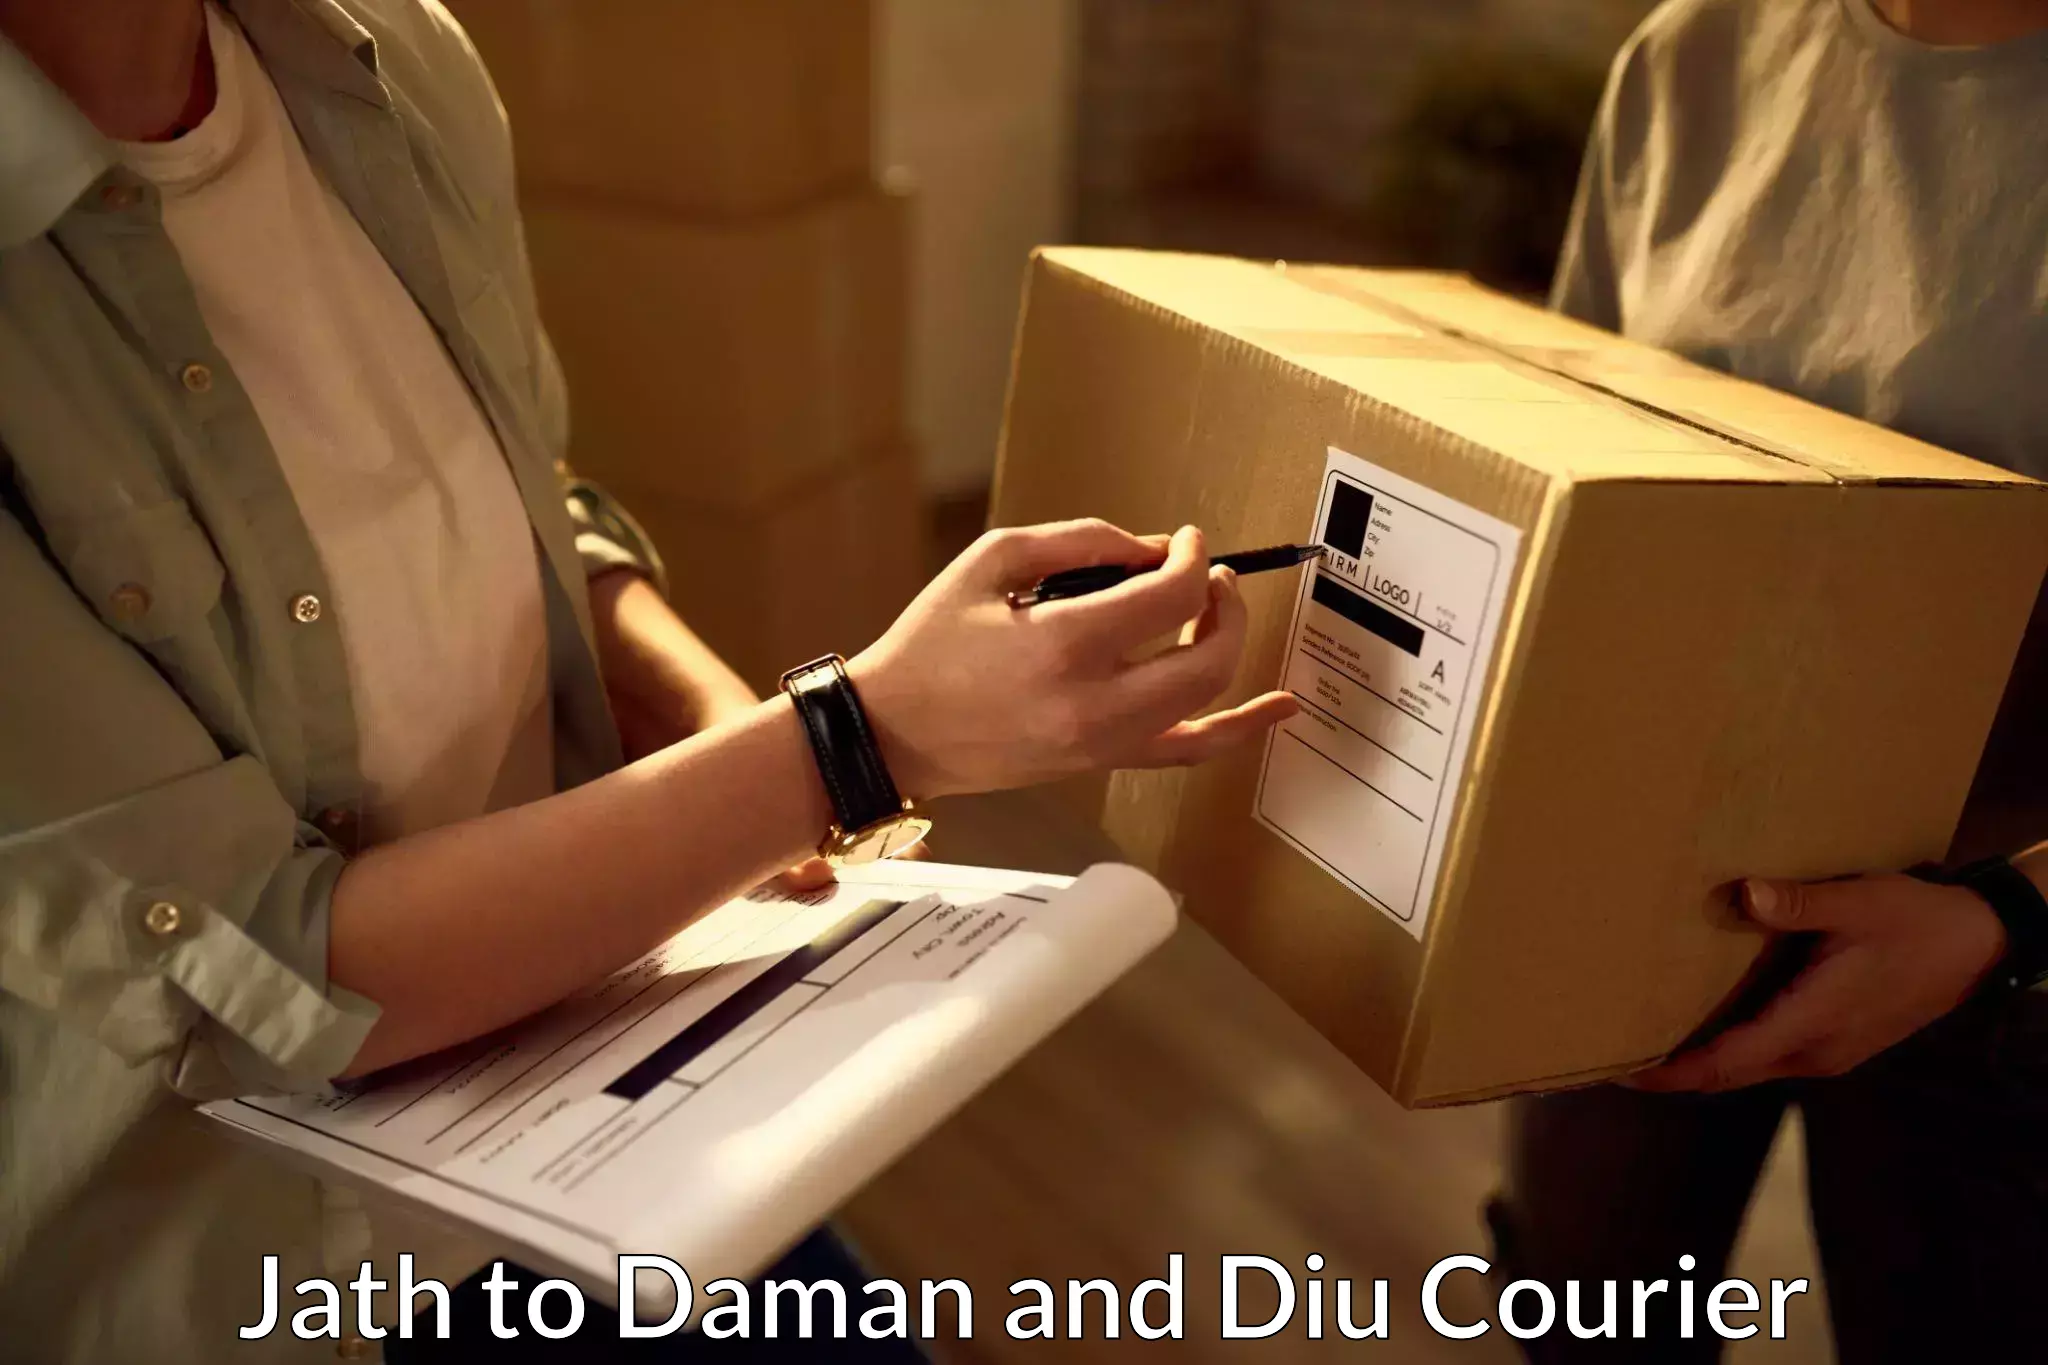 Doorstep delivery service Jath to Daman and Diu